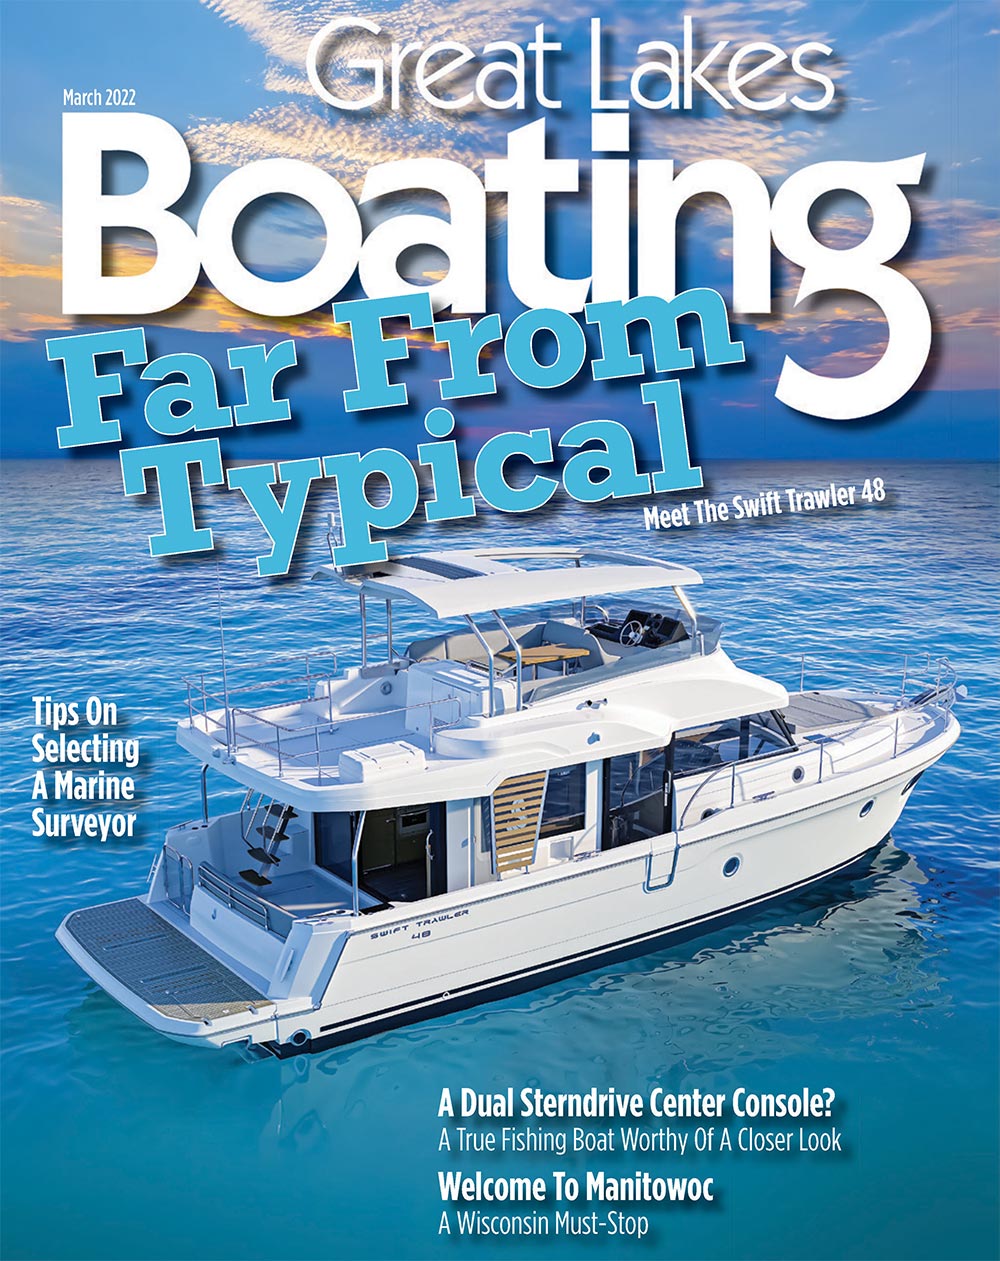 Great Lakes Boating March 2022 cover